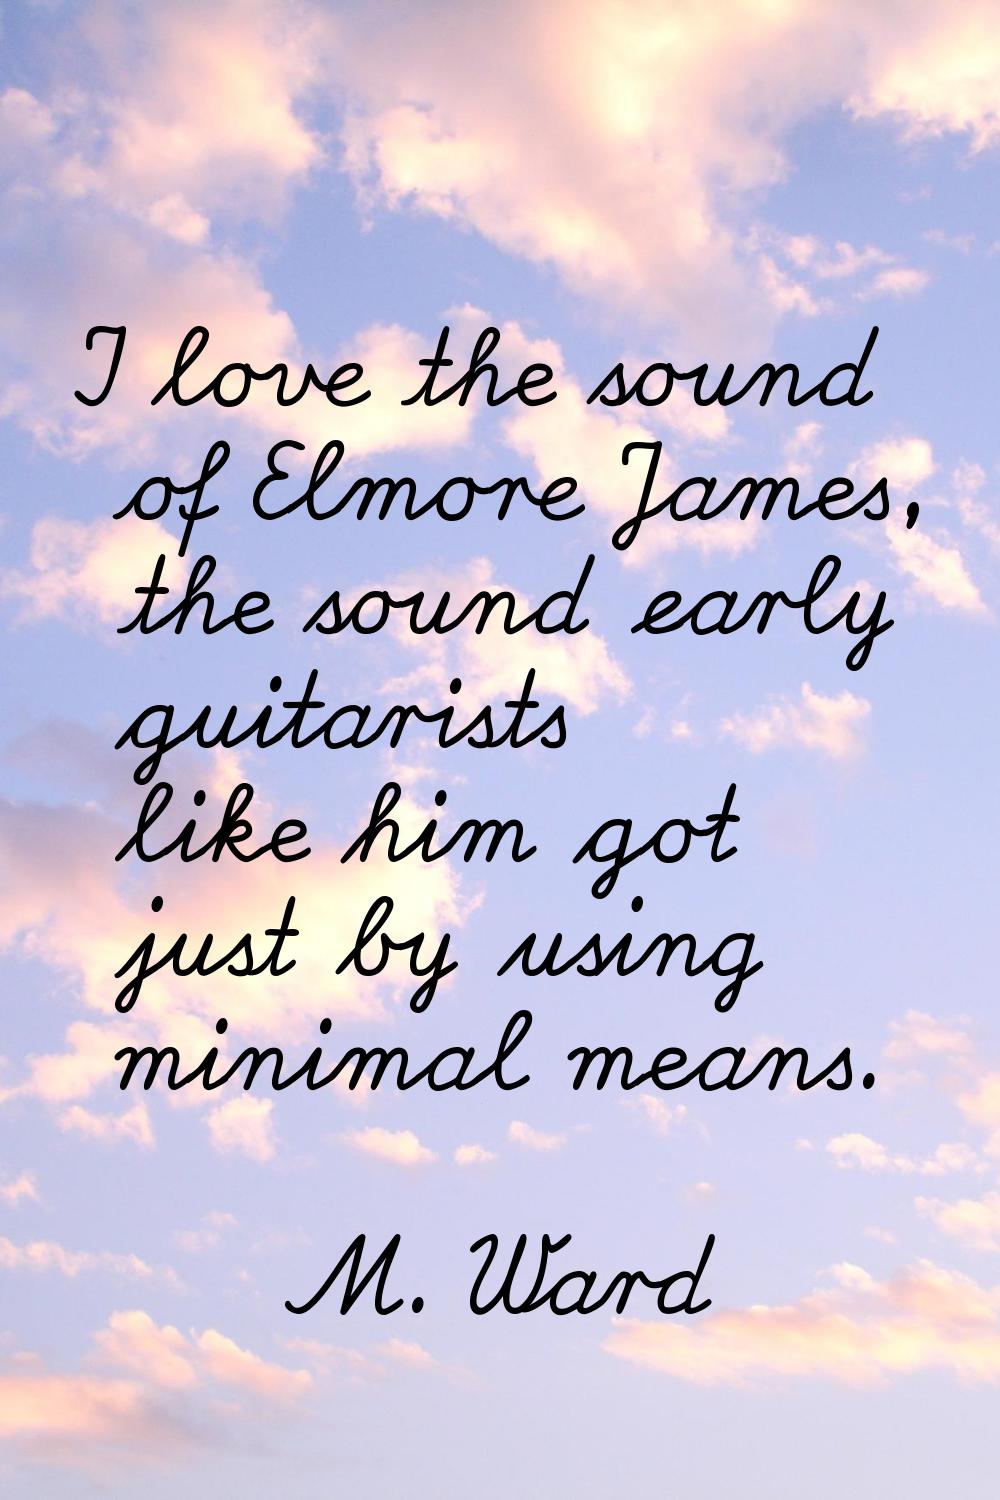 I love the sound of Elmore James, the sound early guitarists like him got just by using minimal mea